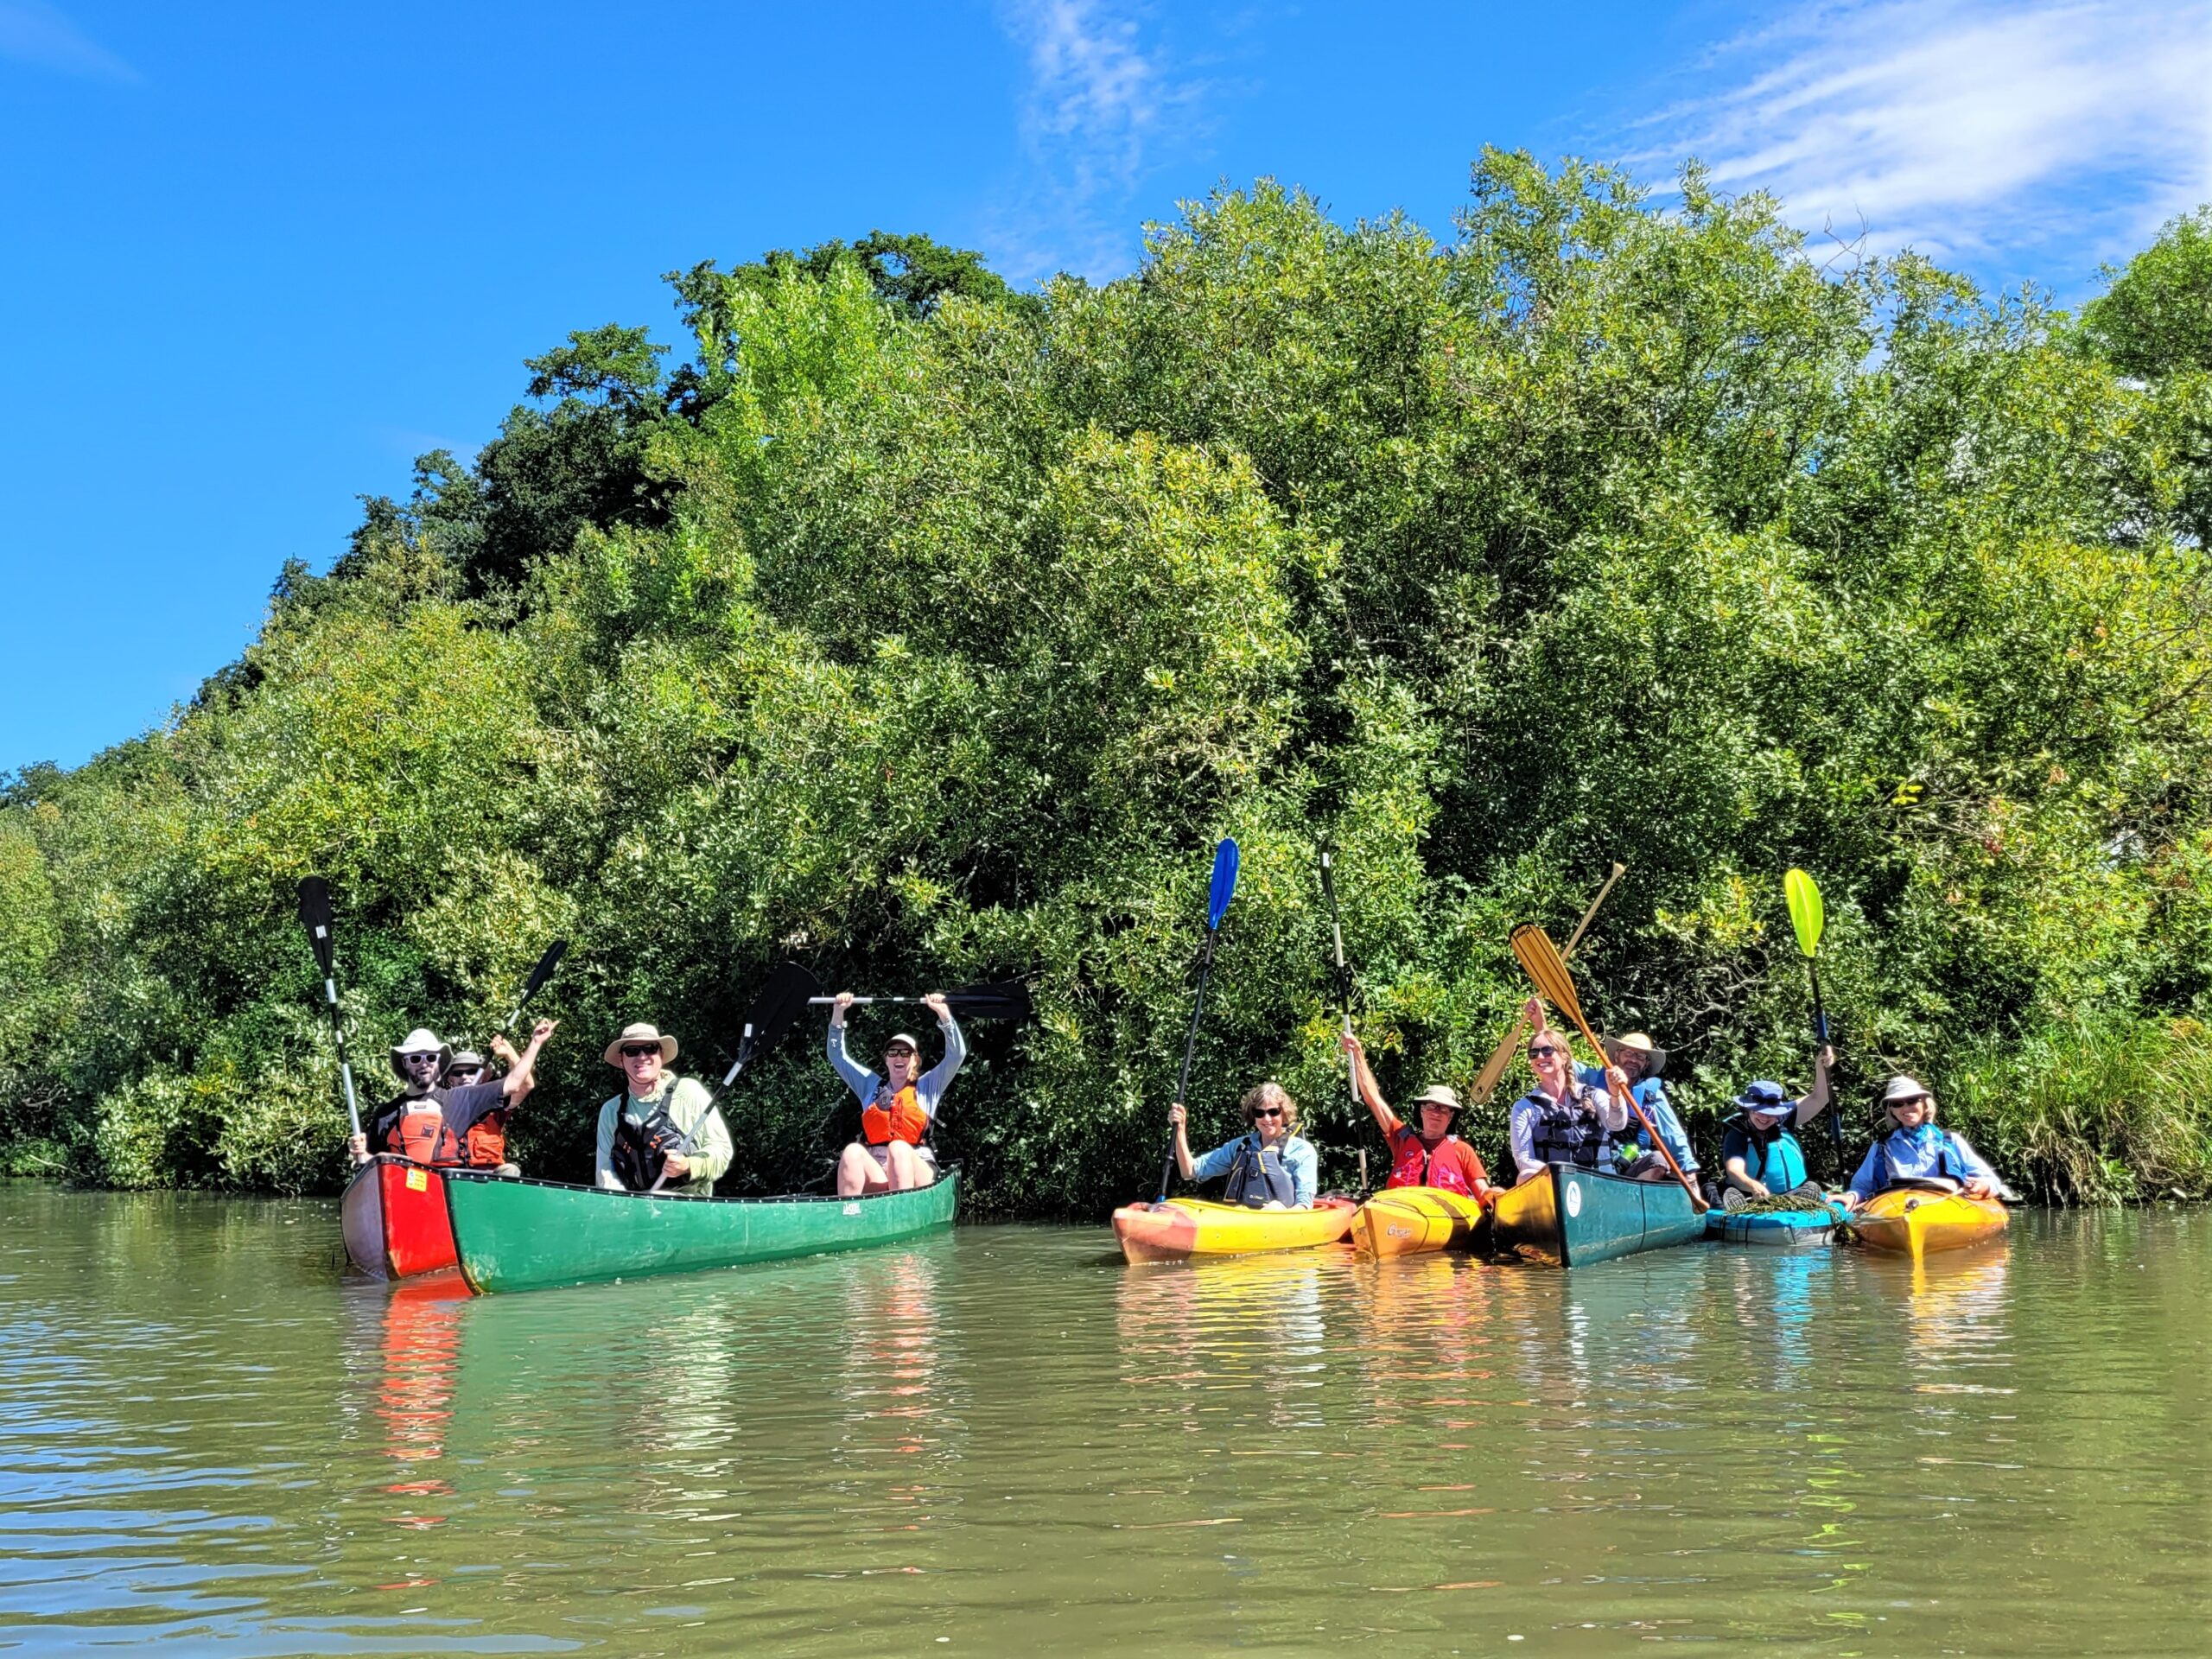 A group of kayakers raise their paddles in a celebratory gesture